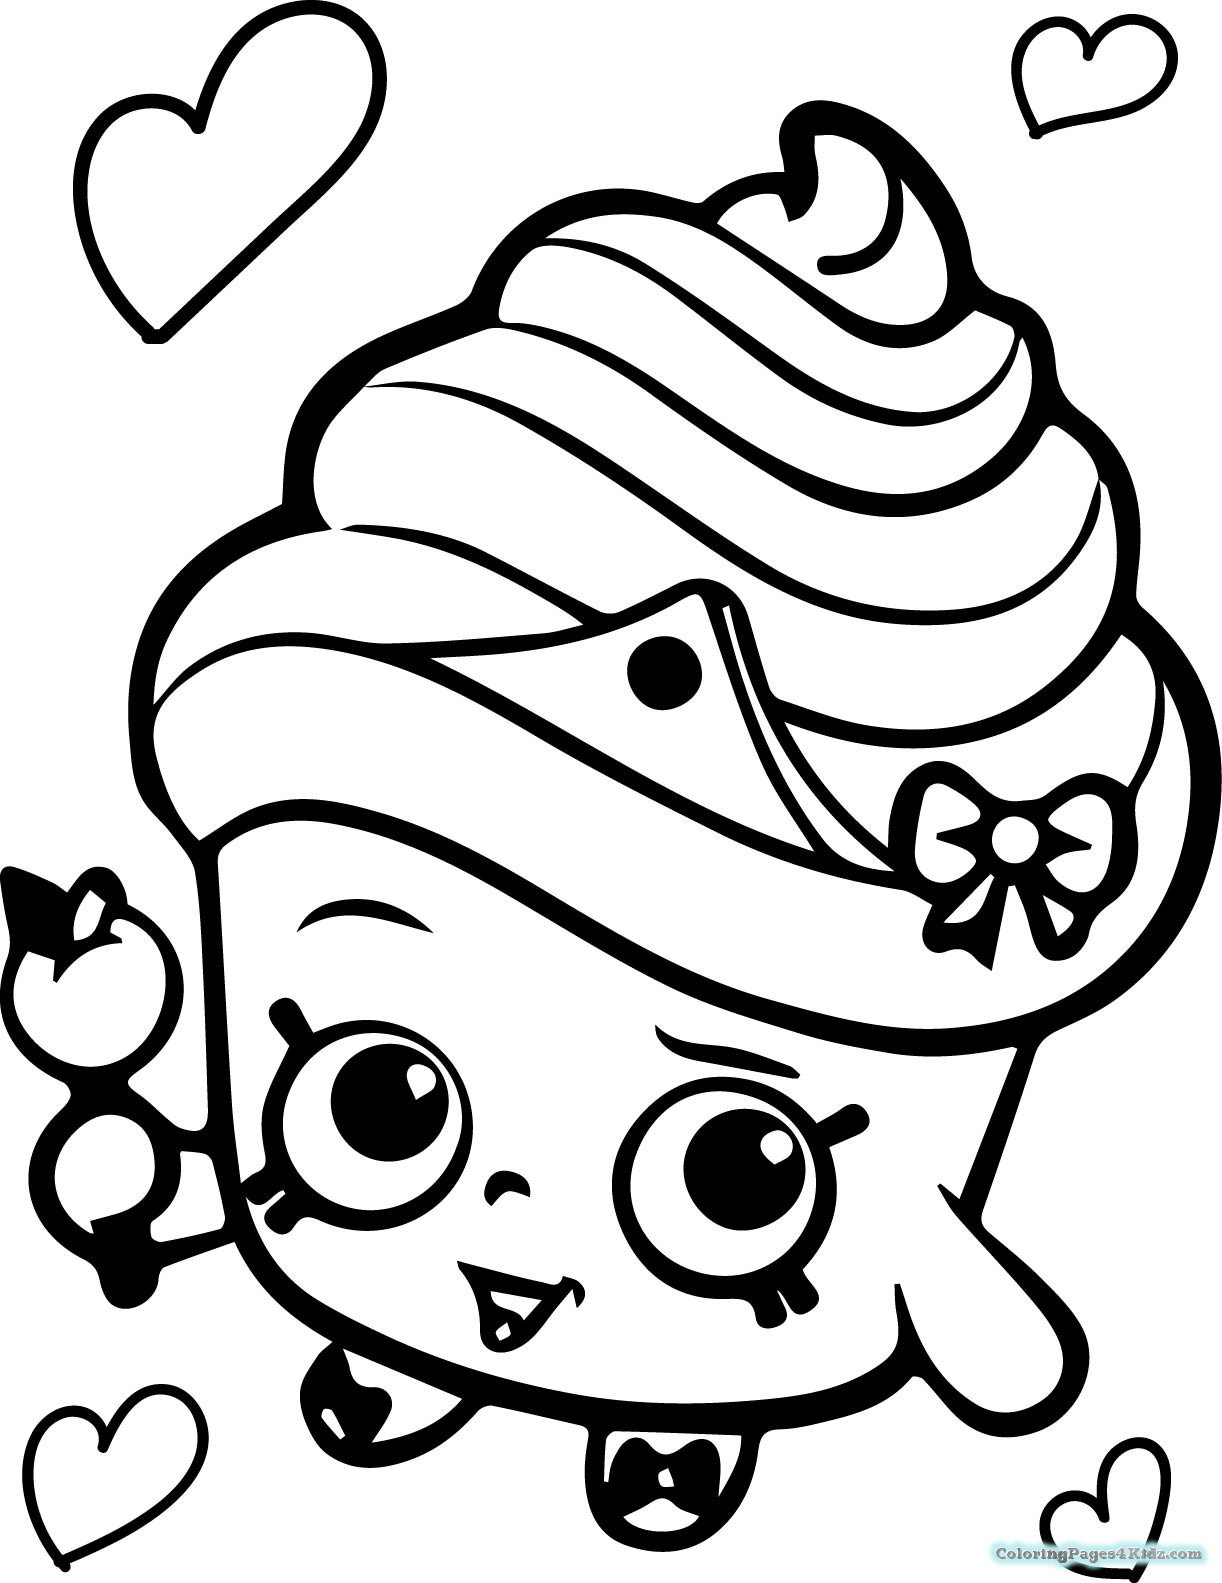 Shopkins Coloring Pages For Kids
 Shopkins Coloring Pages Season 7